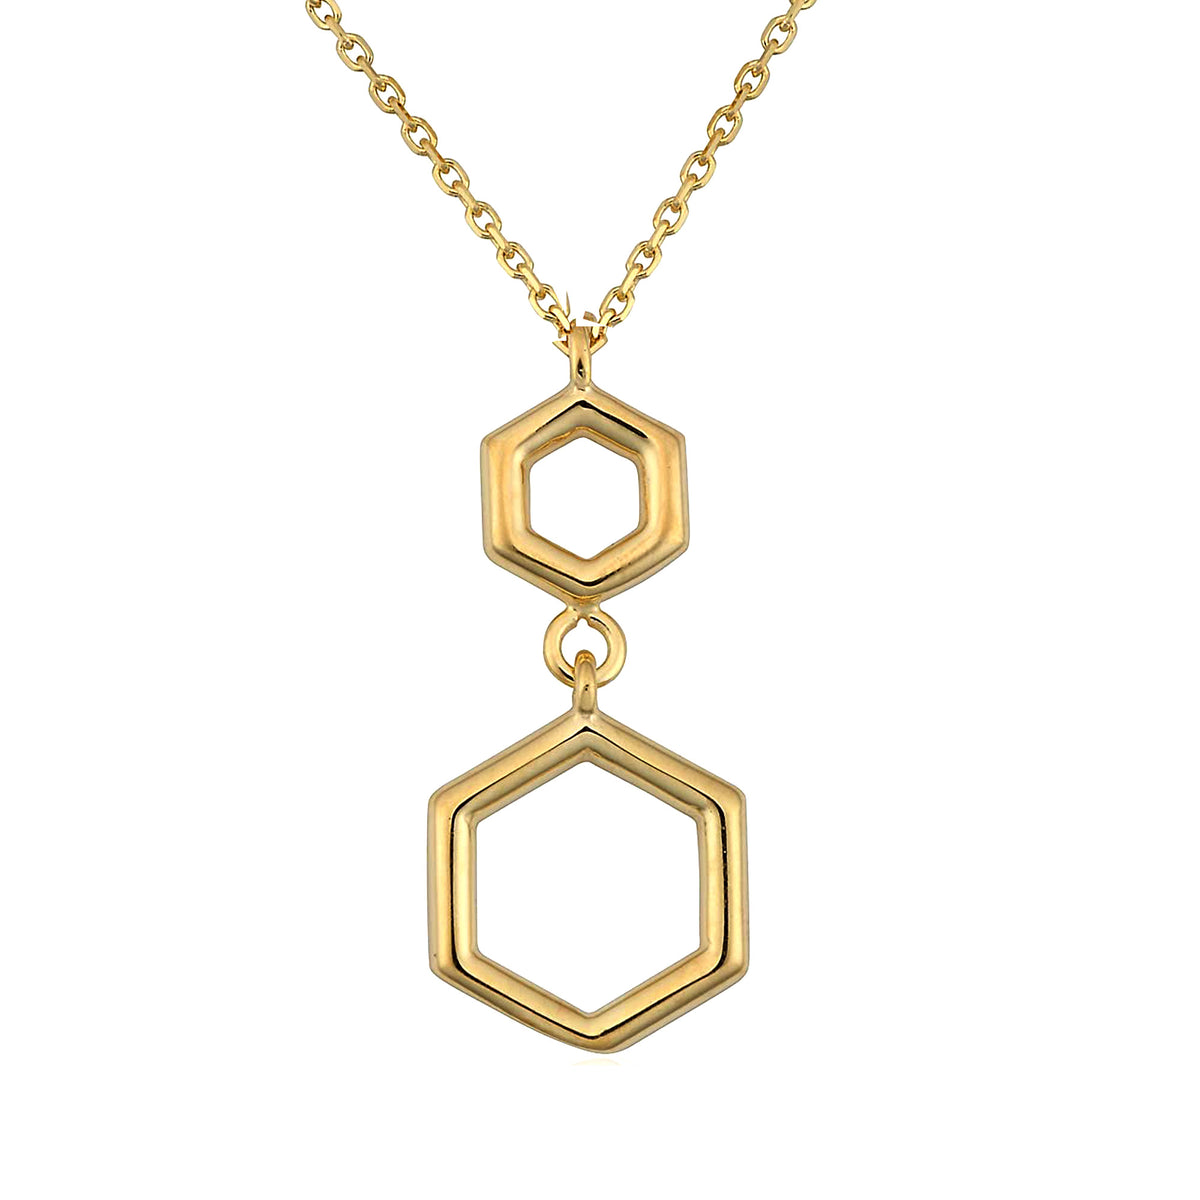 10K Yellow Gold Double Hexagon Geometric Pendant Necklace, 18" fine designer jewelry for men and women